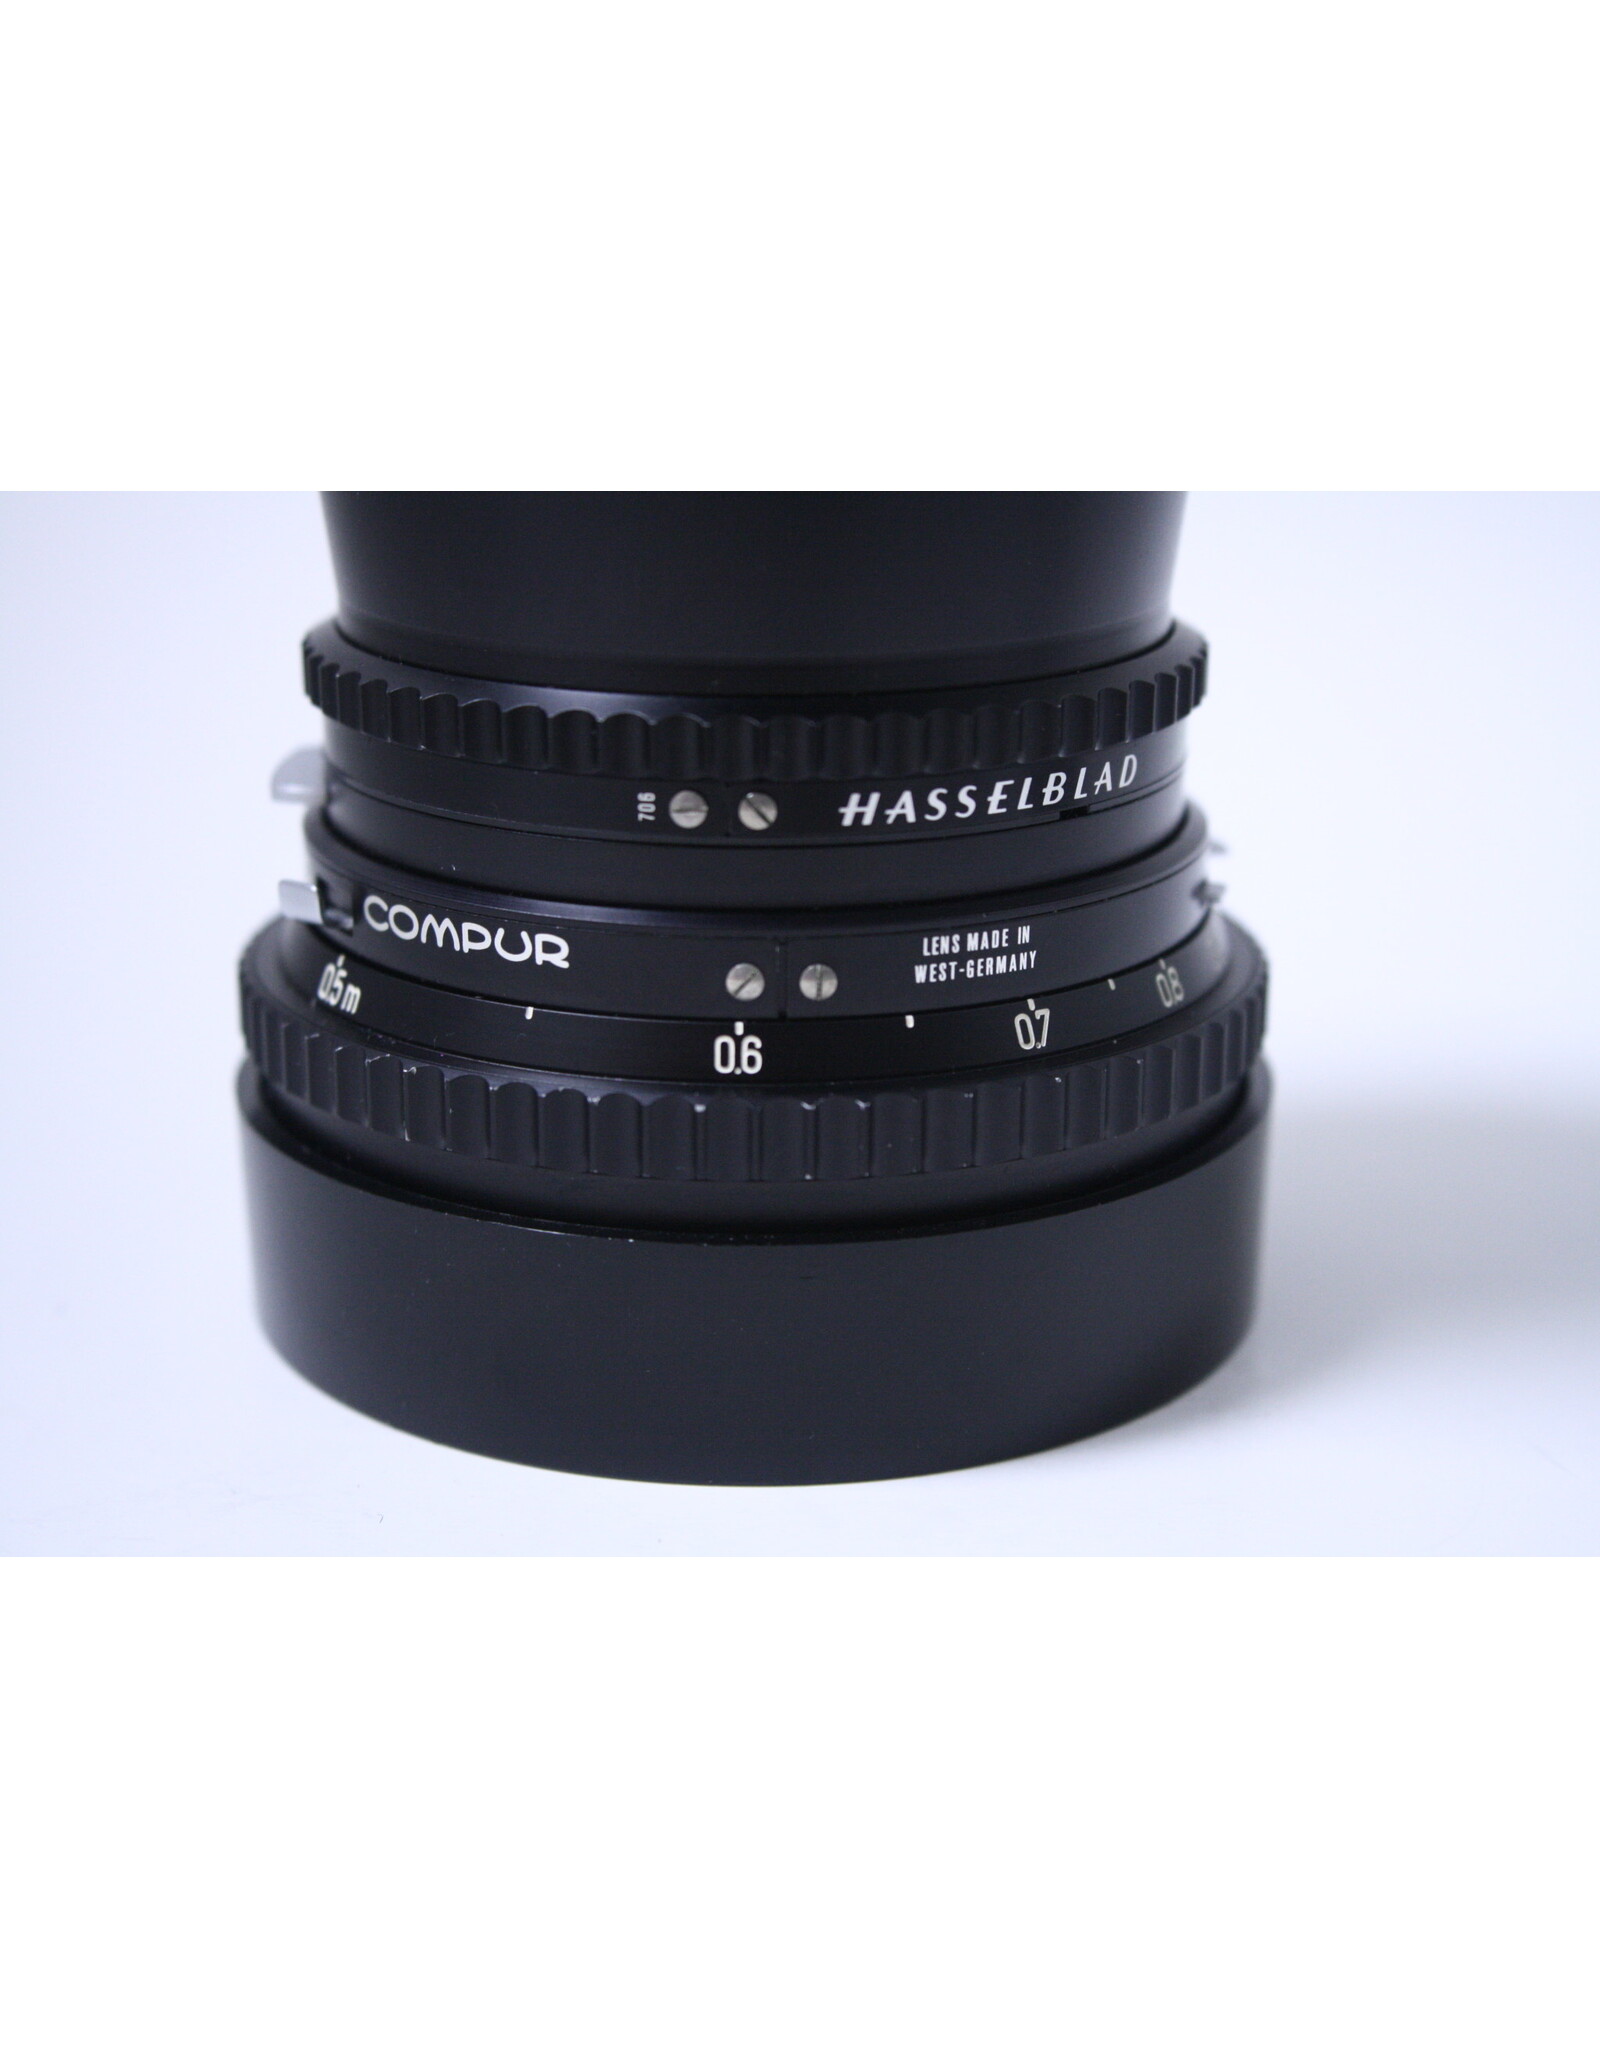 Carl Zeiss Hasselblad Carl Zeiss Distagon CF 50mm F/4 T* Lens With  Caps (Pre-owned)